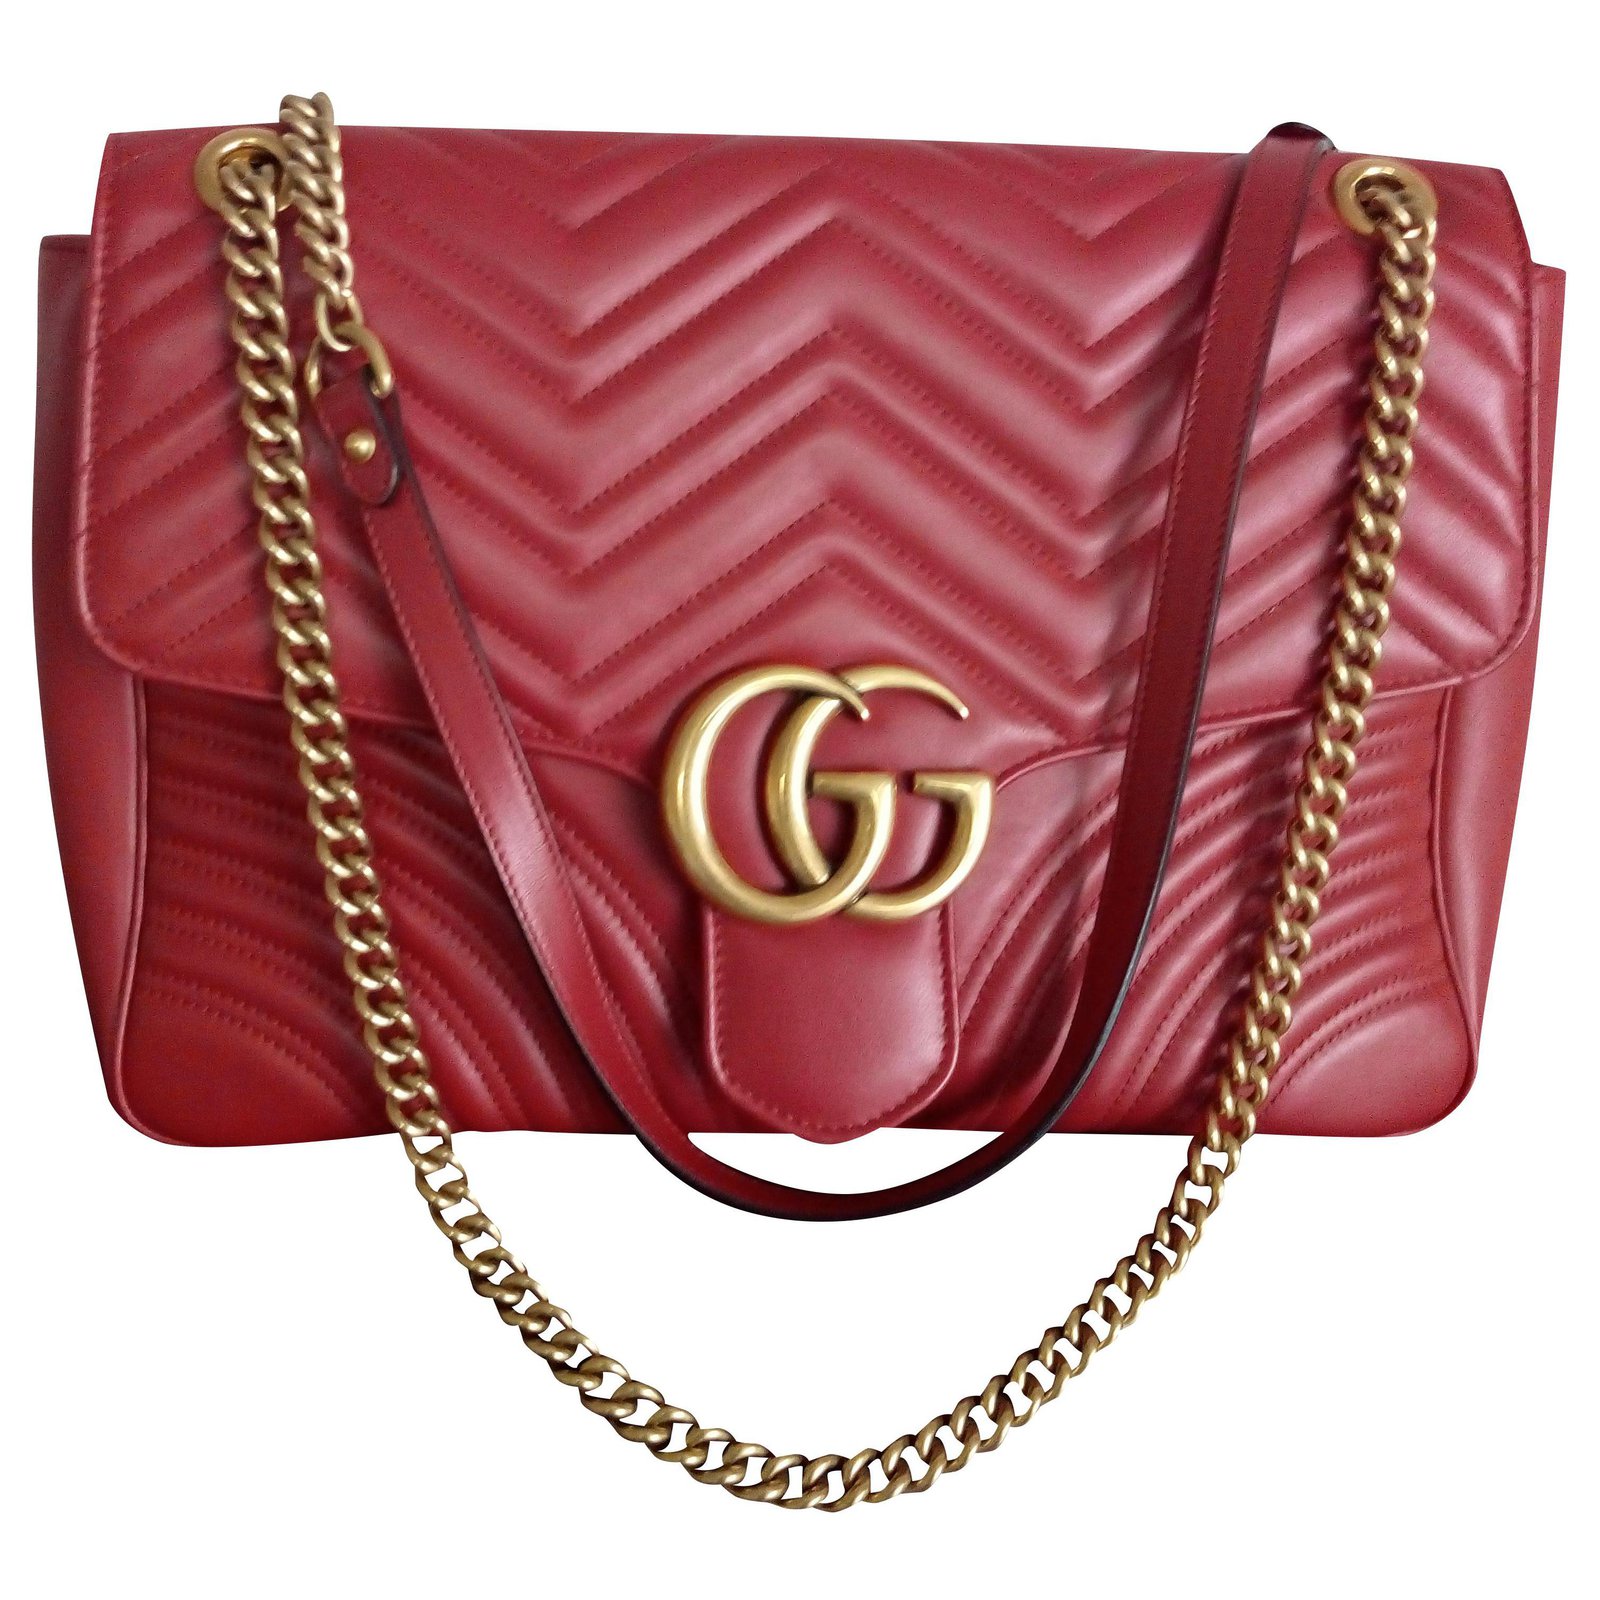 gucci bag with heart on back